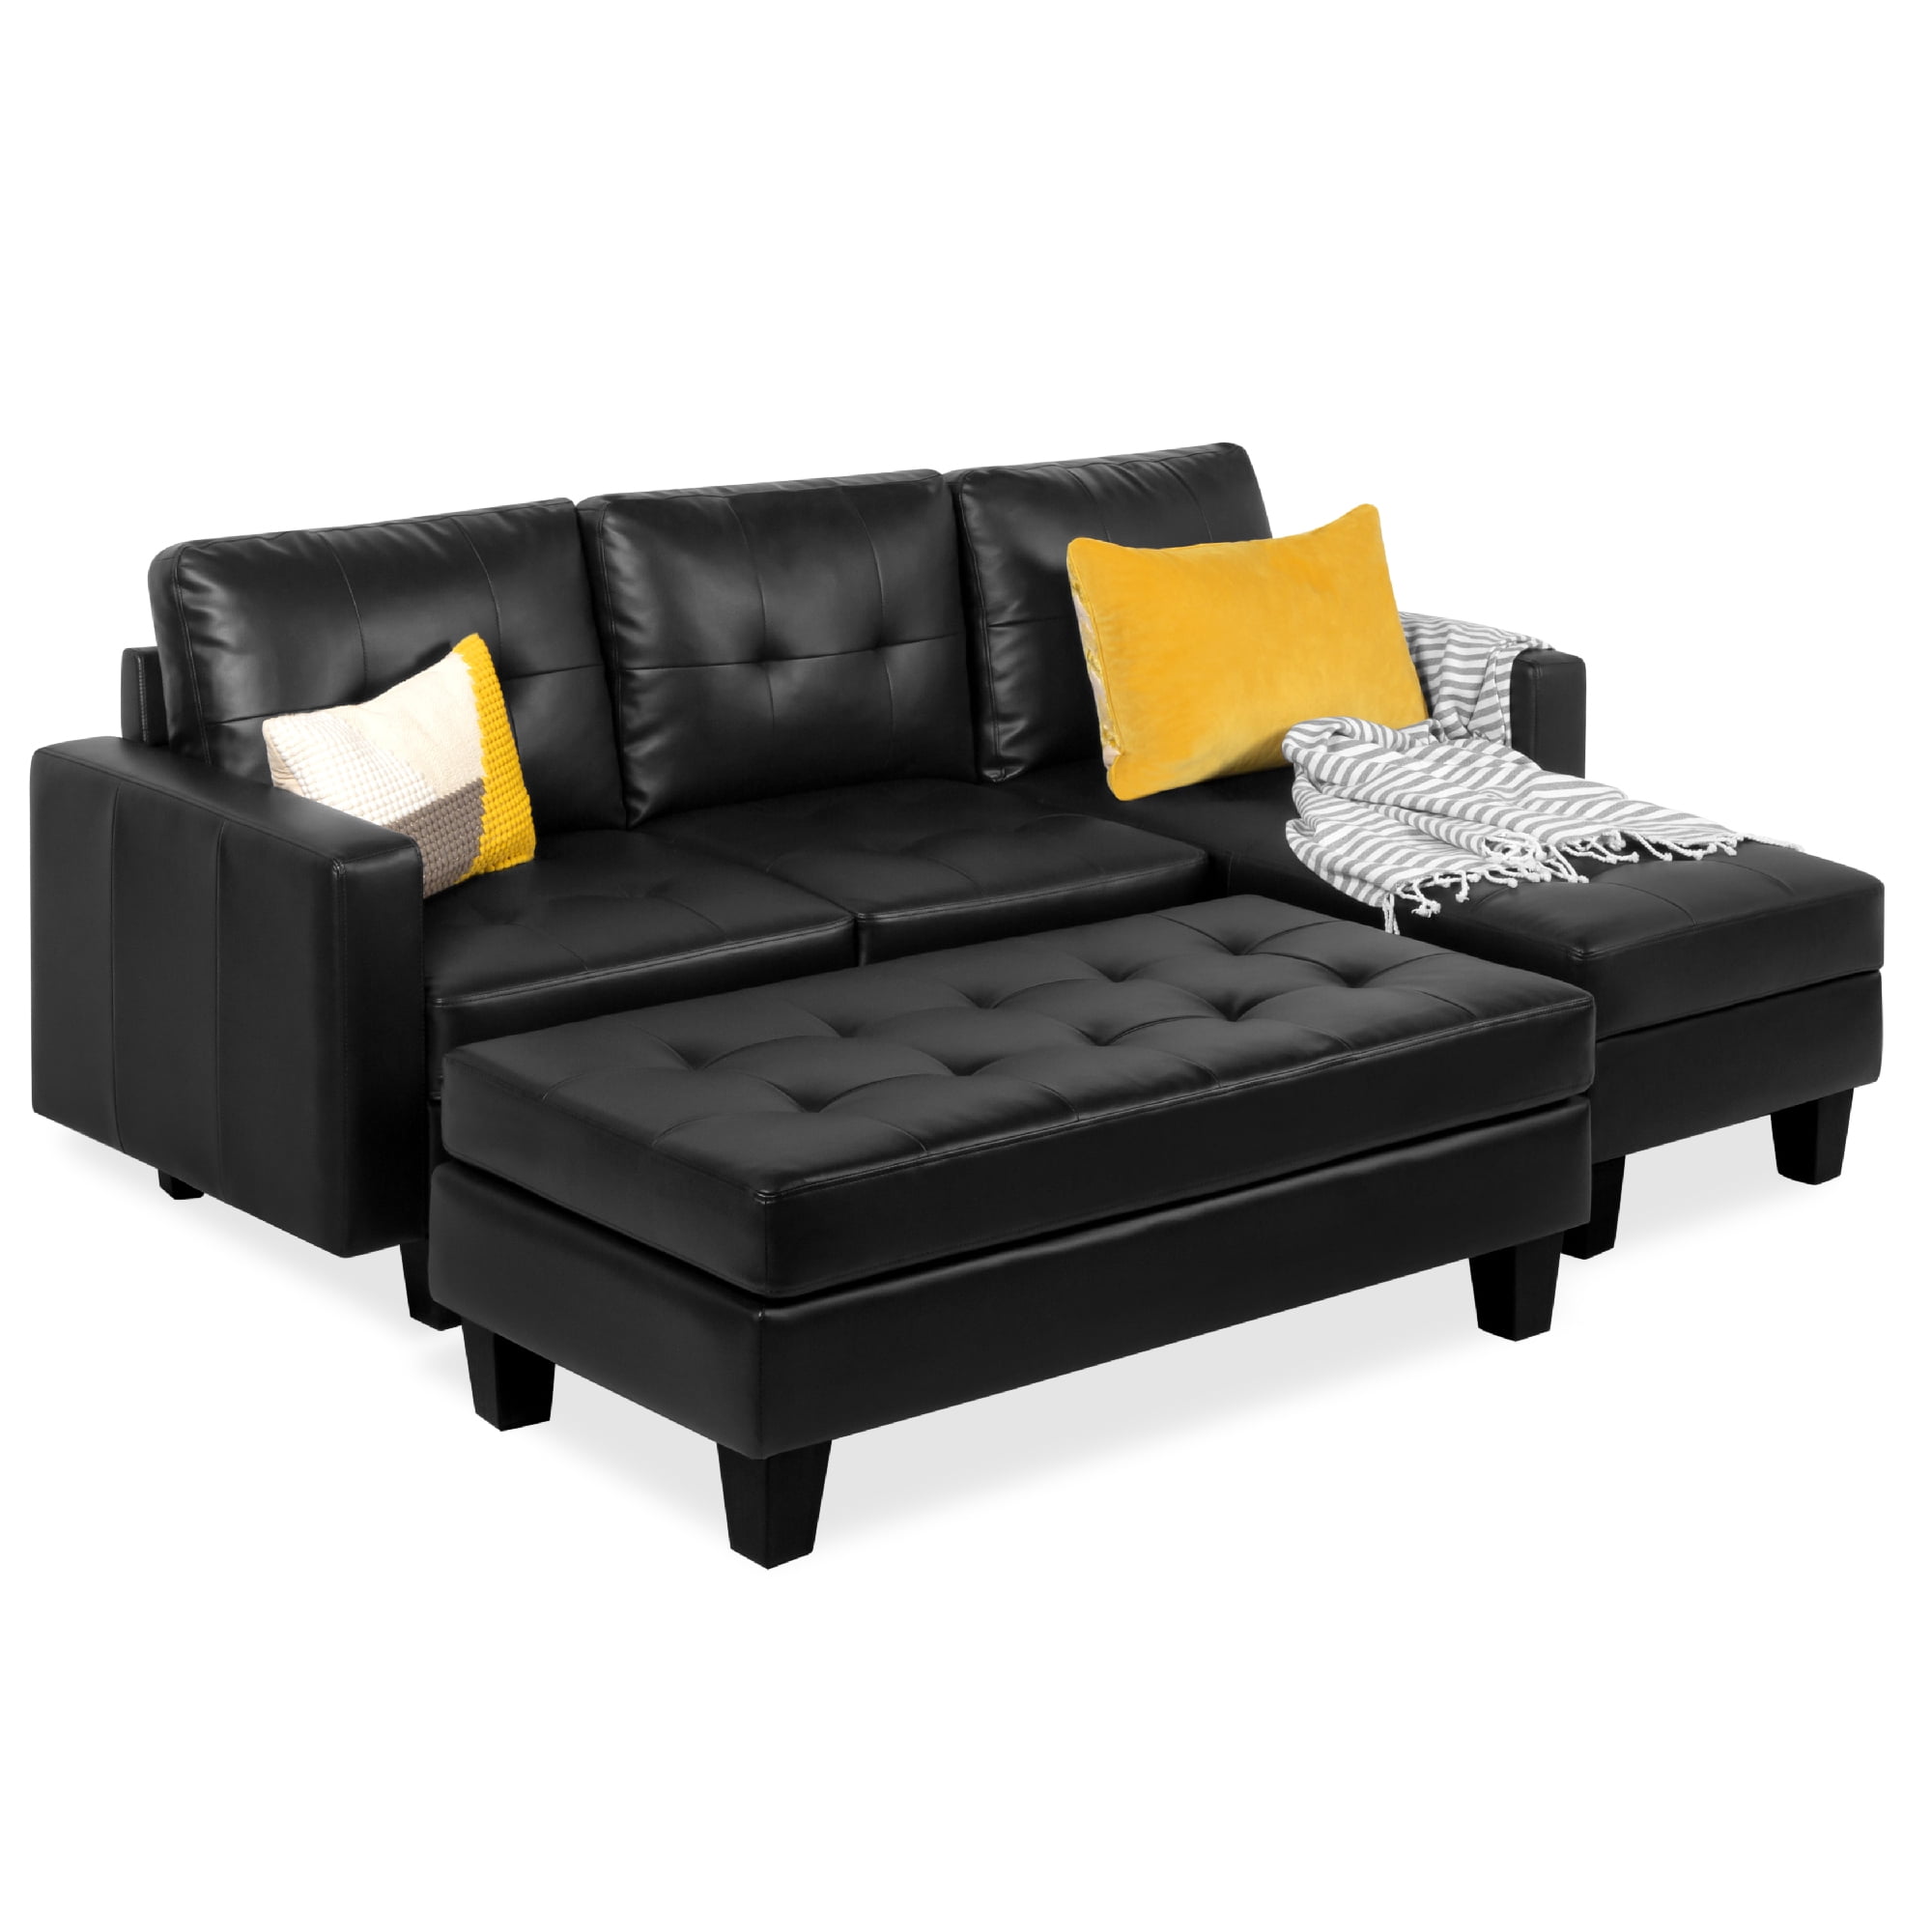 Best Choice Products 3 Seat L Shape Tufted Faux Leather Sectional Sofa Couch Set W Chaise Lounge Ottoman Bench Black Com